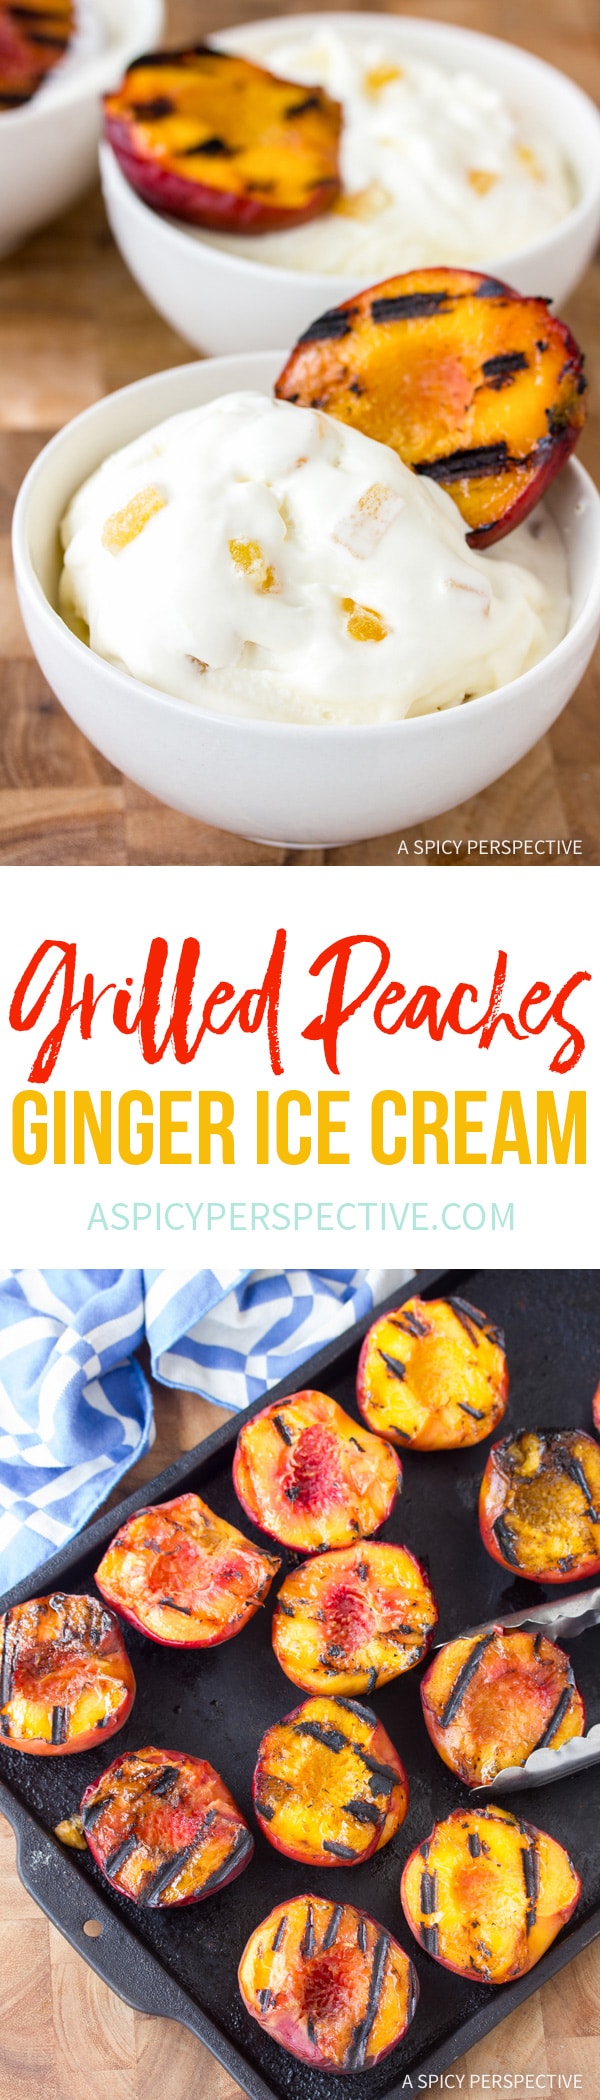 Hot Grilled Peaches and Ginger Ice Cream Recipe #summer #peach